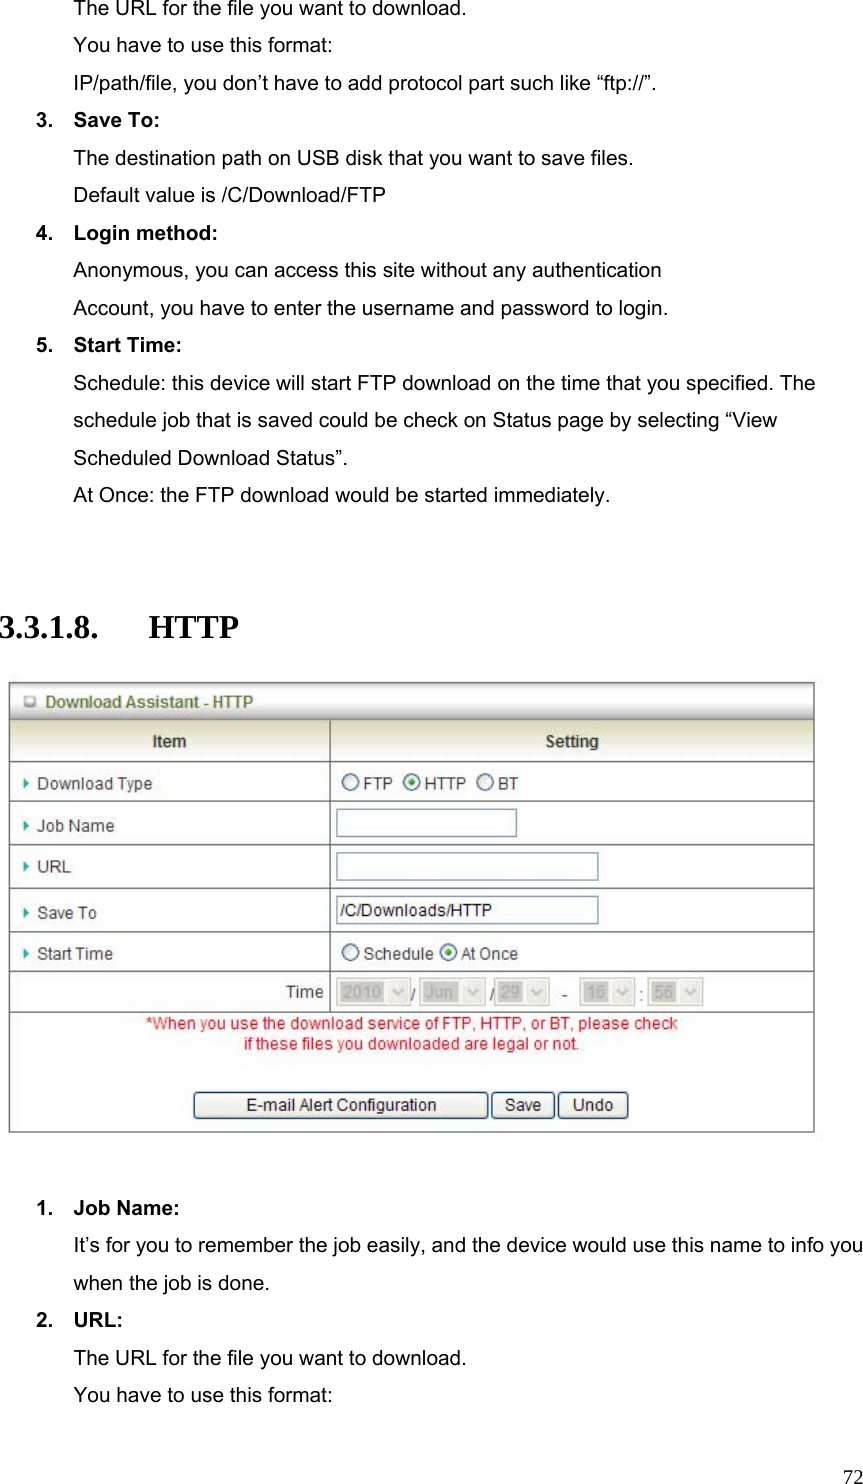  72The URL for the file you want to download. You have to use this format: IP/path/file, you don’t have to add protocol part such like “ftp://”. 3. Save To: The destination path on USB disk that you want to save files. Default value is /C/Download/FTP 4. Login method: Anonymous, you can access this site without any authentication Account, you have to enter the username and password to login. 5. Start Time: Schedule: this device will start FTP download on the time that you specified. The schedule job that is saved could be check on Status page by selecting “View Scheduled Download Status”. At Once: the FTP download would be started immediately.   3.3.1.8. HTTP   1. Job Name: It’s for you to remember the job easily, and the device would use this name to info you when the job is done. 2. URL: The URL for the file you want to download. You have to use this format: 